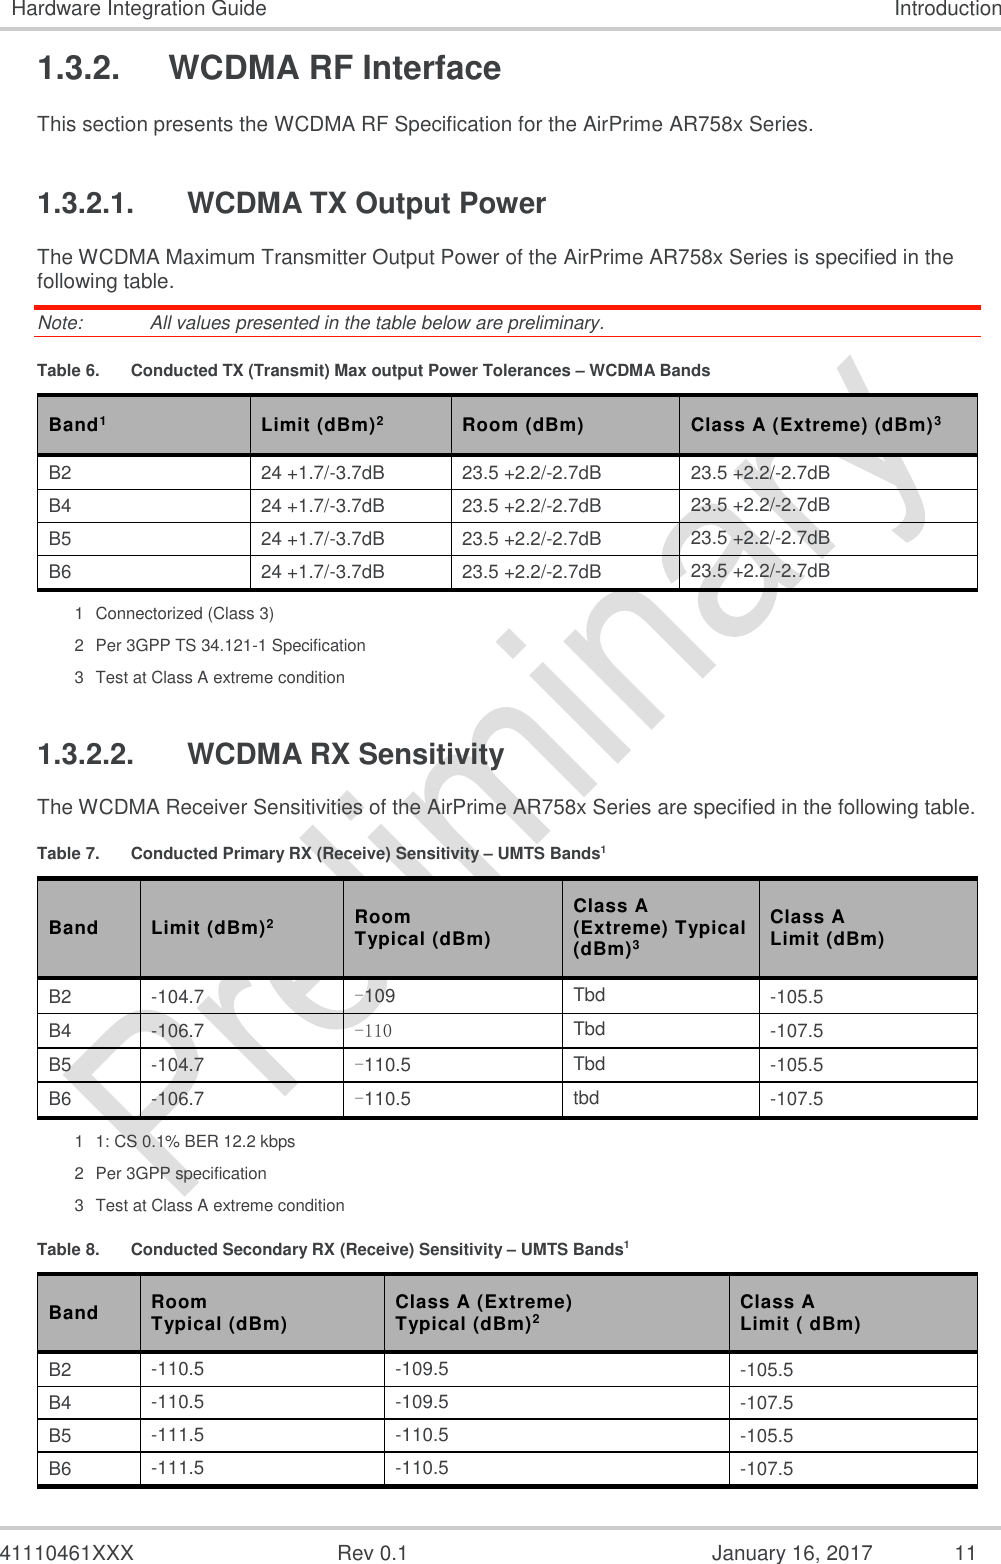  41110461XXX  Rev 0.1  January 16, 2017  11 Hardware Integration Guide Introduction 1.3.2.  WCDMA RF Interface This section presents the WCDMA RF Specification for the AirPrime AR758x Series. 1.3.2.1.  WCDMA TX Output Power The WCDMA Maximum Transmitter Output Power of the AirPrime AR758x Series is specified in the following table. Note:   All values presented in the table below are preliminary. Table 6.  Conducted TX (Transmit) Max output Power Tolerances – WCDMA Bands Band1 Limit (dBm)2 Room (dBm) Class A (Extreme) (dBm)3 B2 24 +1.7/-3.7dB 23.5 +2.2/-2.7dB 23.5 +2.2/-2.7dB B4 24 +1.7/-3.7dB 23.5 +2.2/-2.7dB 23.5 +2.2/-2.7dB B5 24 +1.7/-3.7dB 23.5 +2.2/-2.7dB 23.5 +2.2/-2.7dB B6 24 +1.7/-3.7dB 23.5 +2.2/-2.7dB 23.5 +2.2/-2.7dB 1  Connectorized (Class 3) 2  Per 3GPP TS 34.121-1 Specification 3  Test at Class A extreme condition 1.3.2.2.  WCDMA RX Sensitivity The WCDMA Receiver Sensitivities of the AirPrime AR758x Series are specified in the following table. Table 7.  Conducted Primary RX (Receive) Sensitivity – UMTS Bands1 Band Limit (dBm)2 Room Typical (dBm) Class A (Extreme) Typical (dBm)3 Class A Limit (dBm) B2 -104.7 -109 Tbd -105.5 B4 -106.7 -110 Tbd -107.5 B5 -104.7 -110.5 Tbd -105.5 B6 -106.7 -110.5 tbd -107.5 1  1: CS 0.1% BER 12.2 kbps 2  Per 3GPP specification 3  Test at Class A extreme condition Table 8.  Conducted Secondary RX (Receive) Sensitivity – UMTS Bands1 Band Room Typical (dBm) Class A (Extreme) Typical (dBm)2 Class A Limit ( dBm) B2 -110.5 -109.5 -105.5 B4 -110.5 -109.5 -107.5 B5 -111.5 -110.5 -105.5 B6 -111.5 -110.5 -107.5 